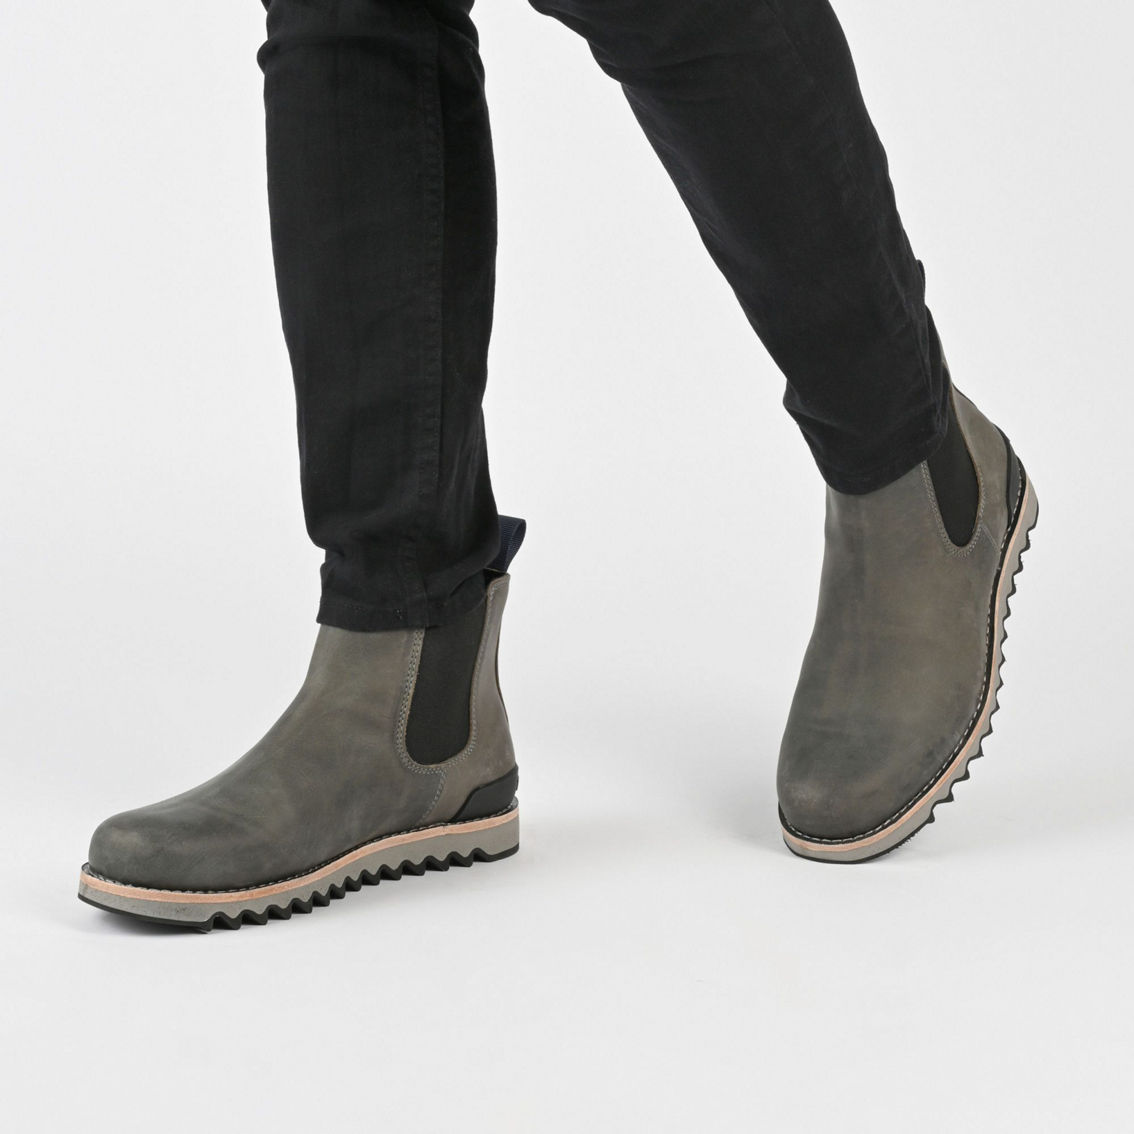 Territory Yellowstone Water Resistant Chelsea Boot - Image 5 of 5